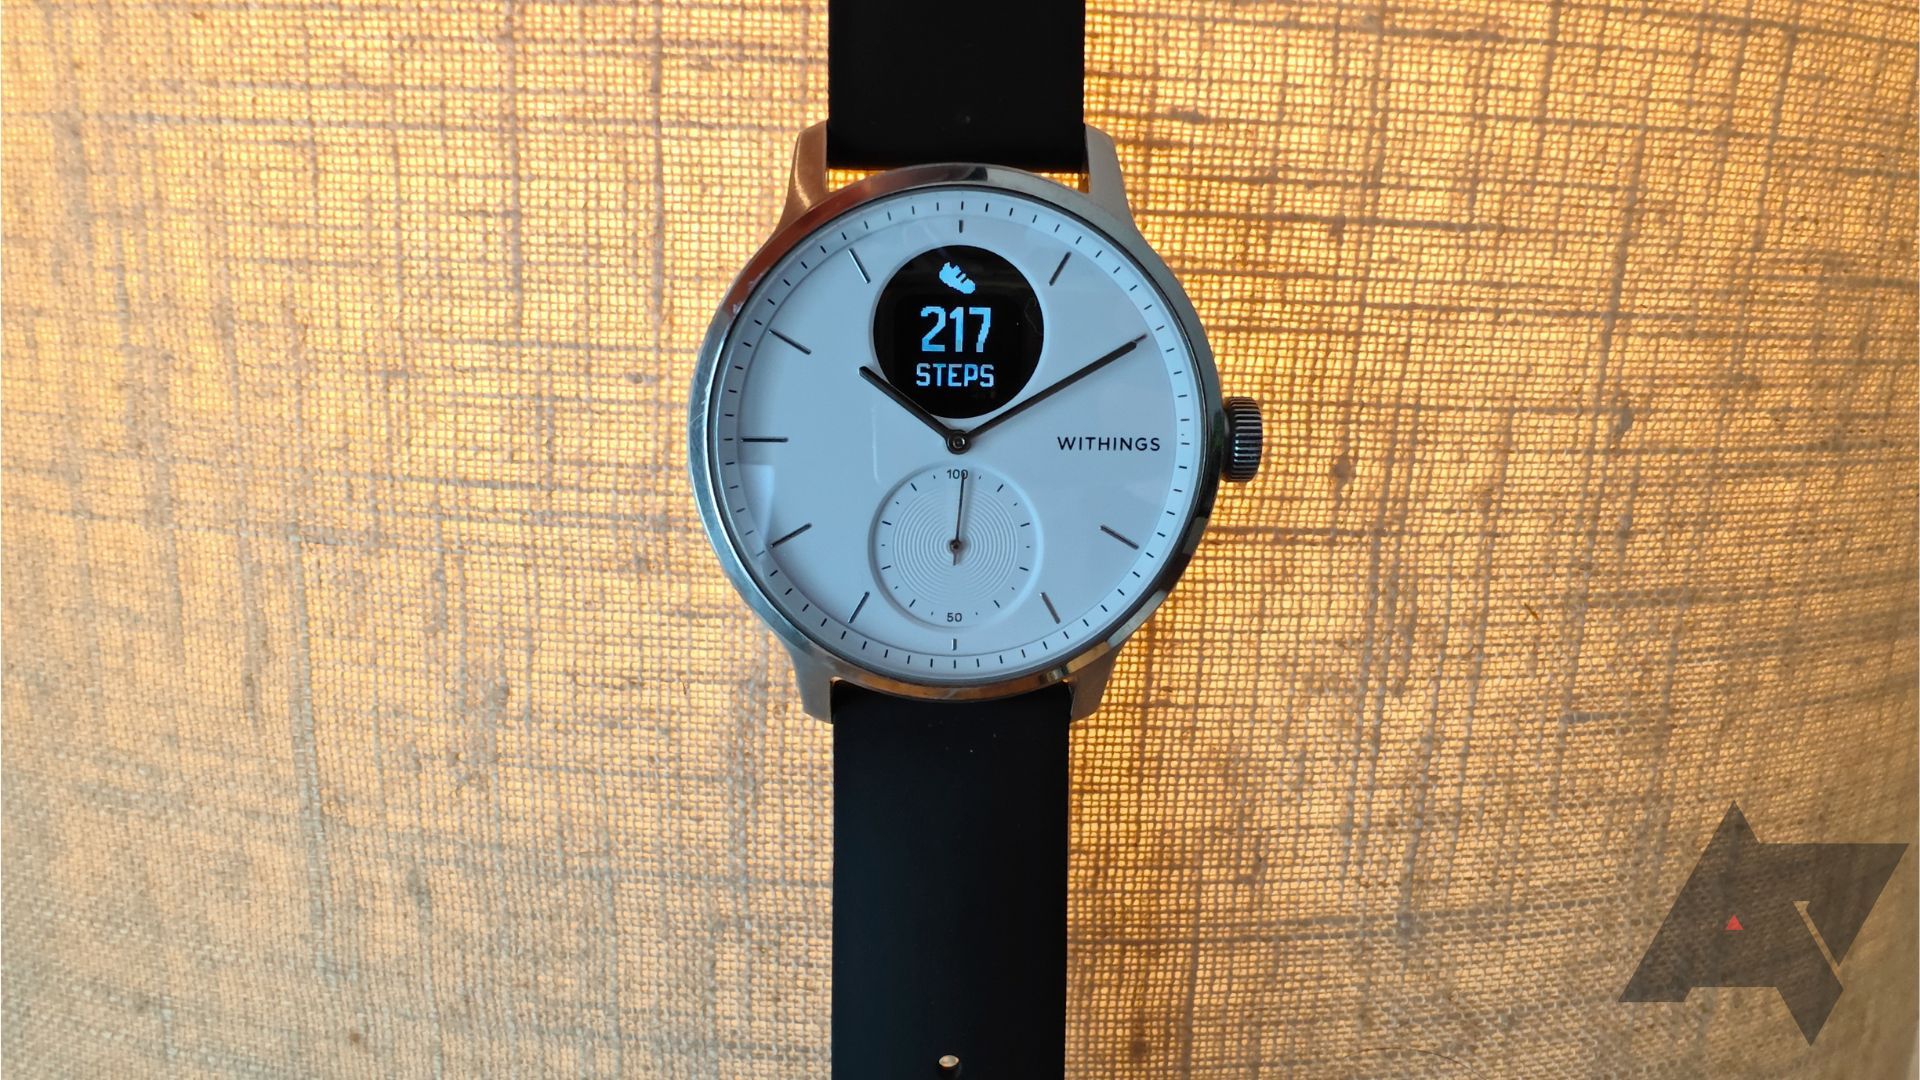 Go for a hybrid smartwatch that fits in with everyday life - Steel HR |  Withings